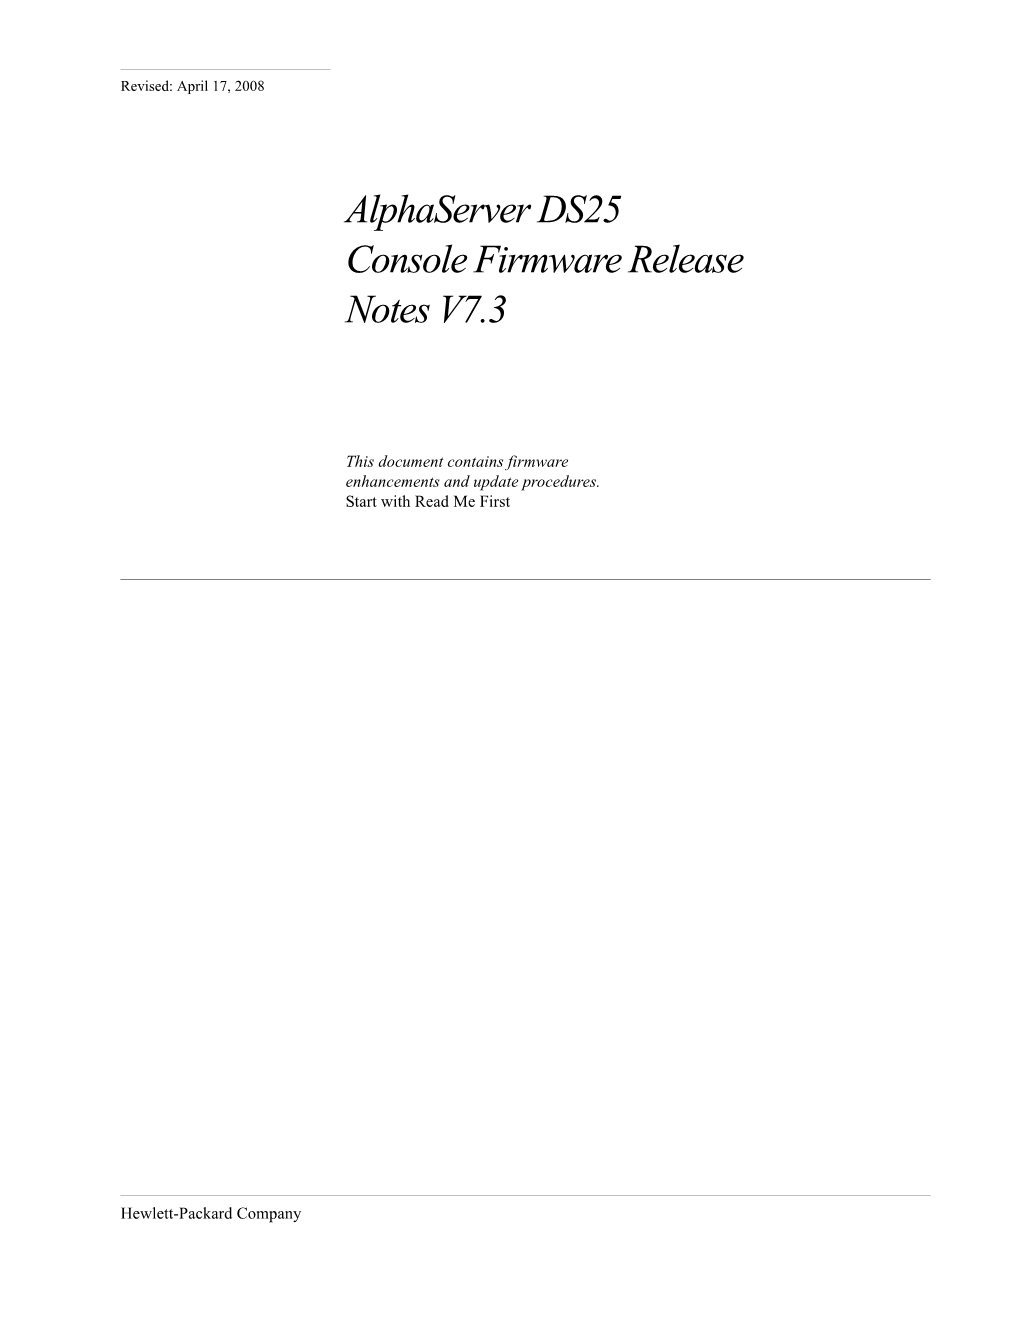 Alphaserver DS25 Console Firmware Release Notes V7.3